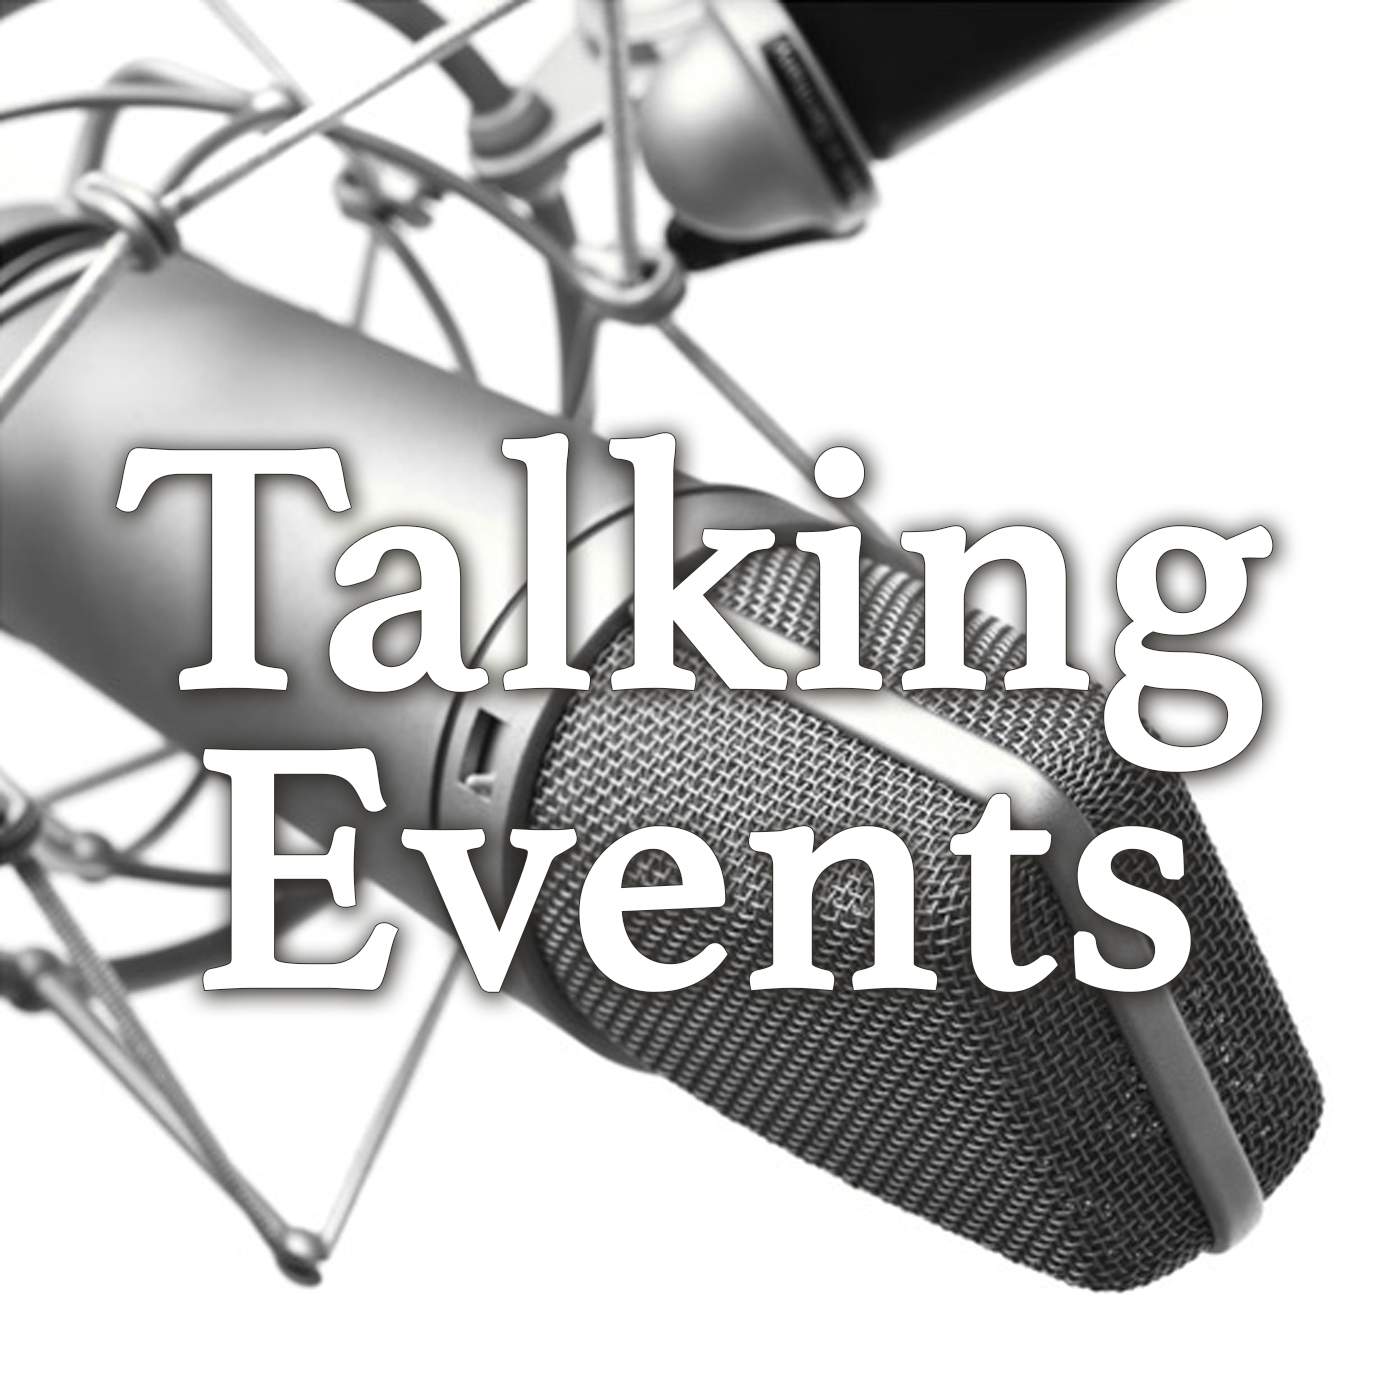 Talking Events Arena Group special: History, developments, and why the UK leads the overlay industry